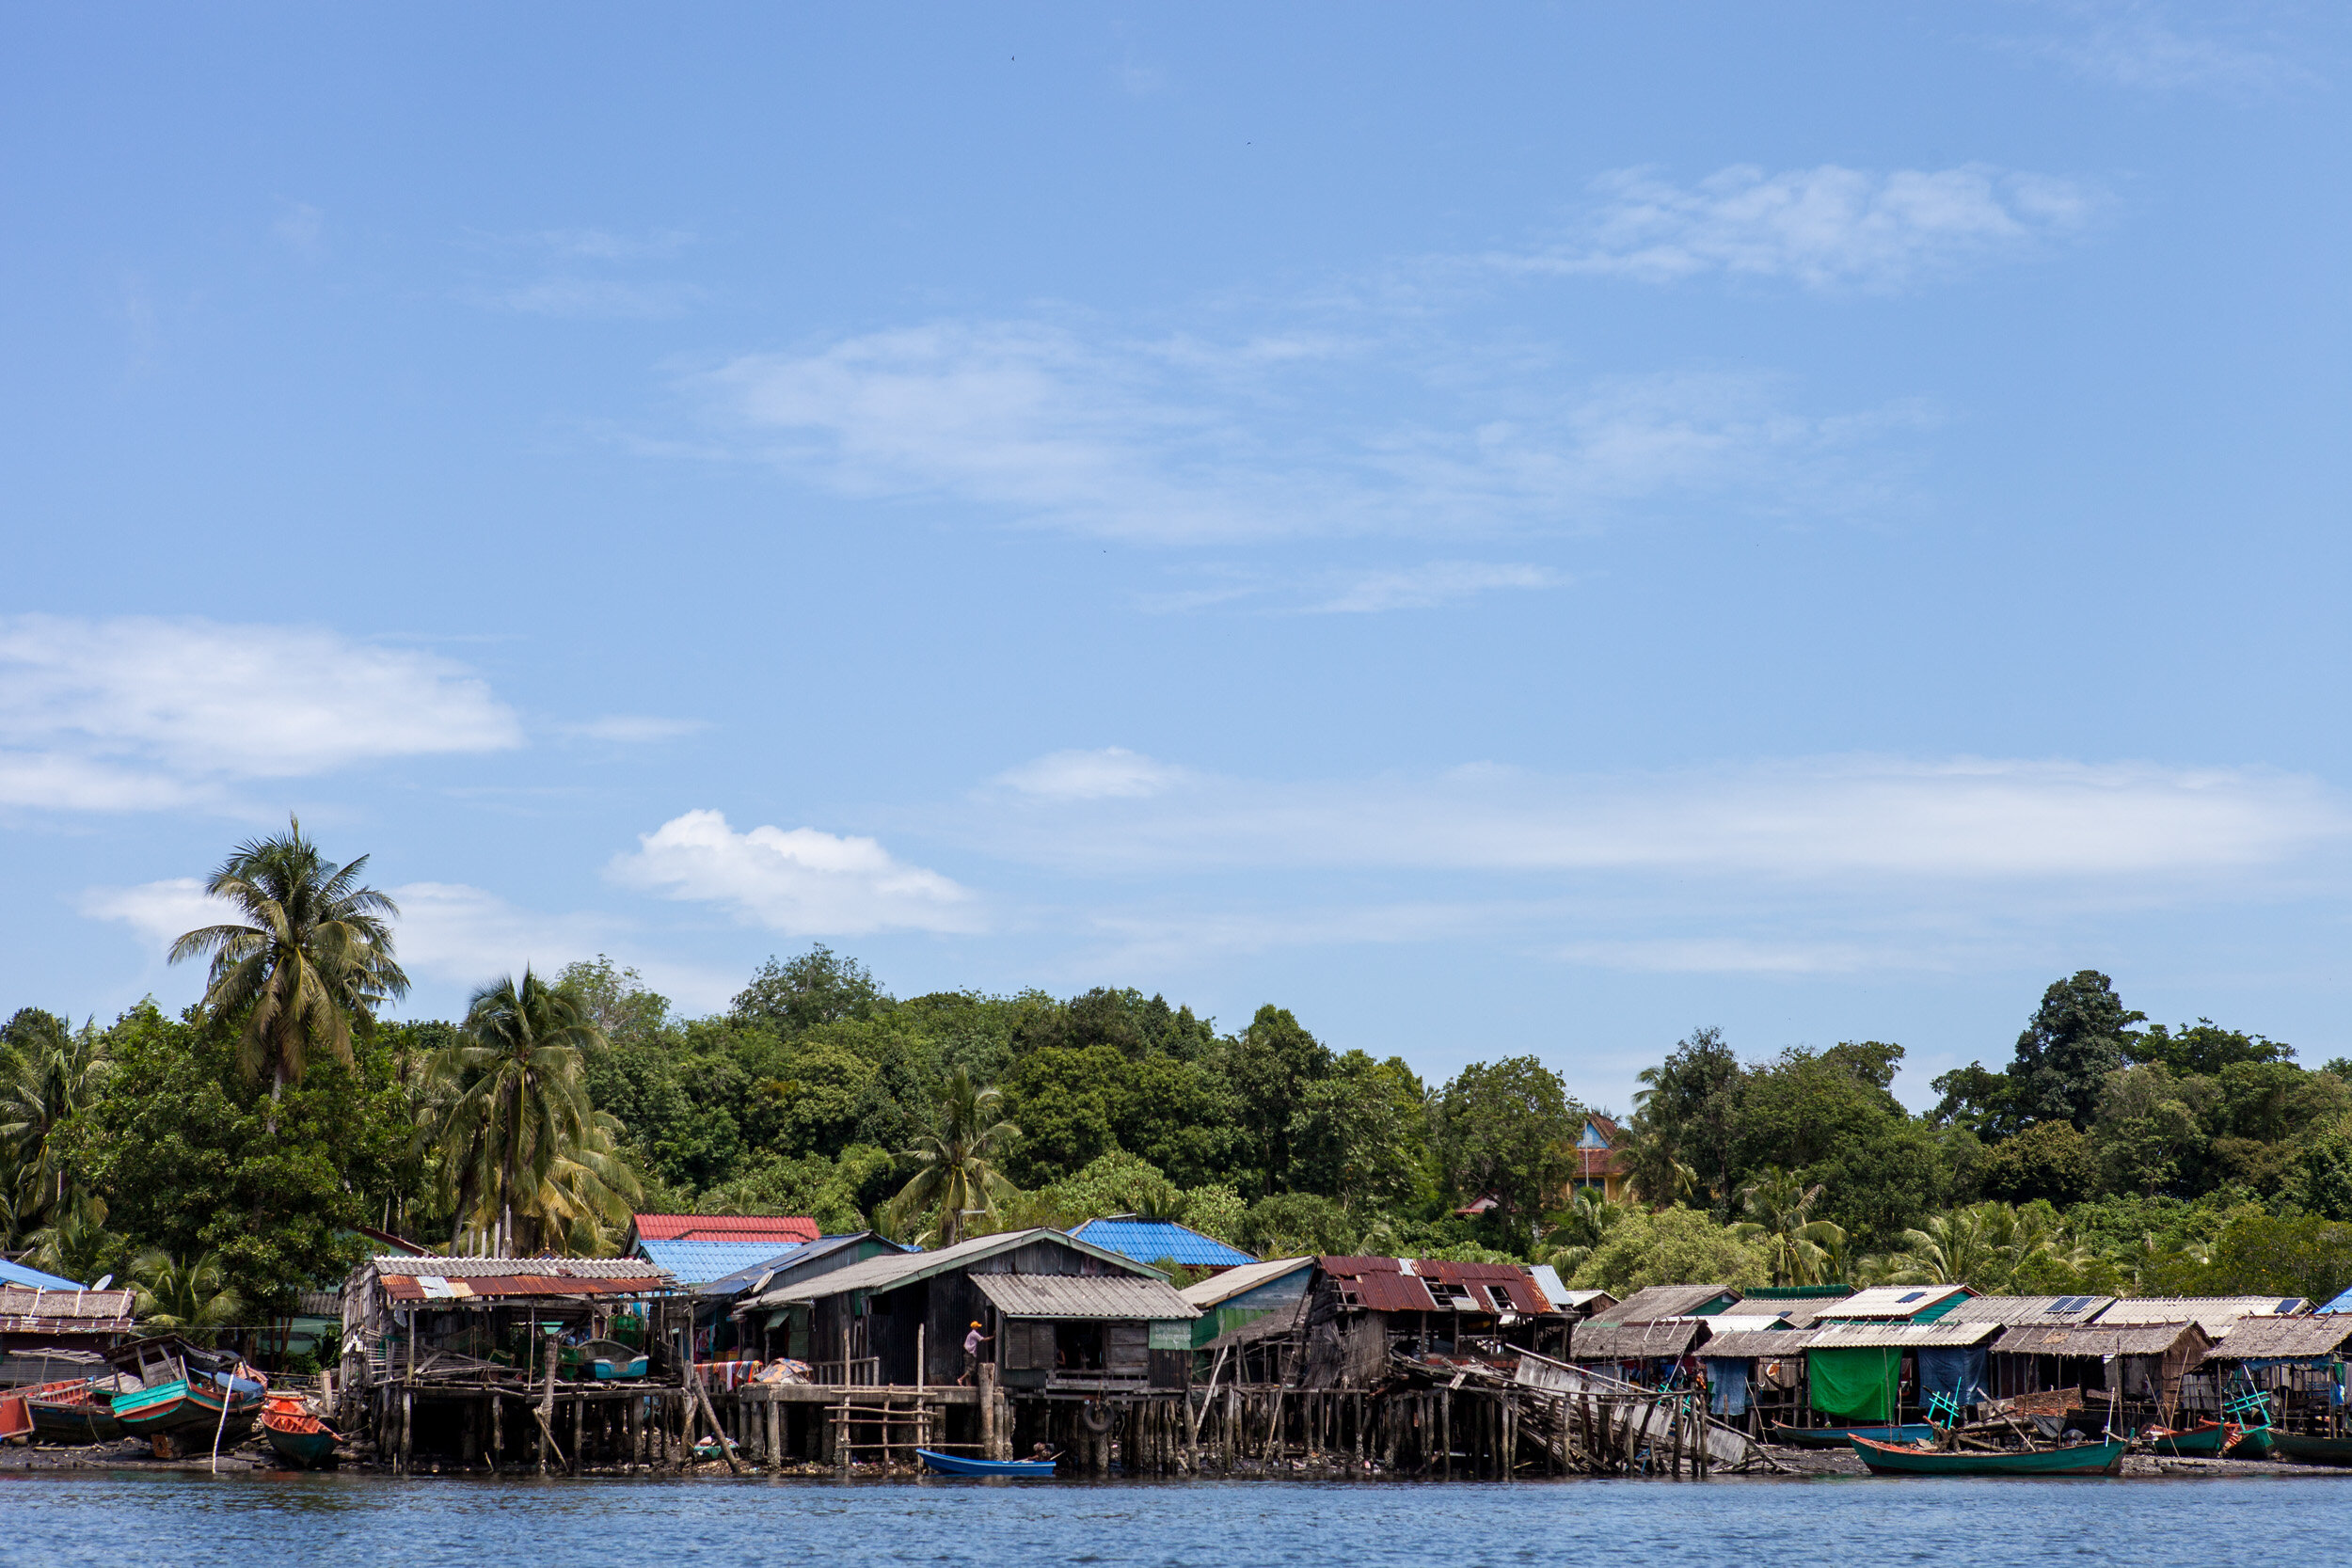  Koh Sralau is a typical fishing village. Accessible only by boat, almost all the inhabitants rely on the ecosystem around them to provide for their needs. 